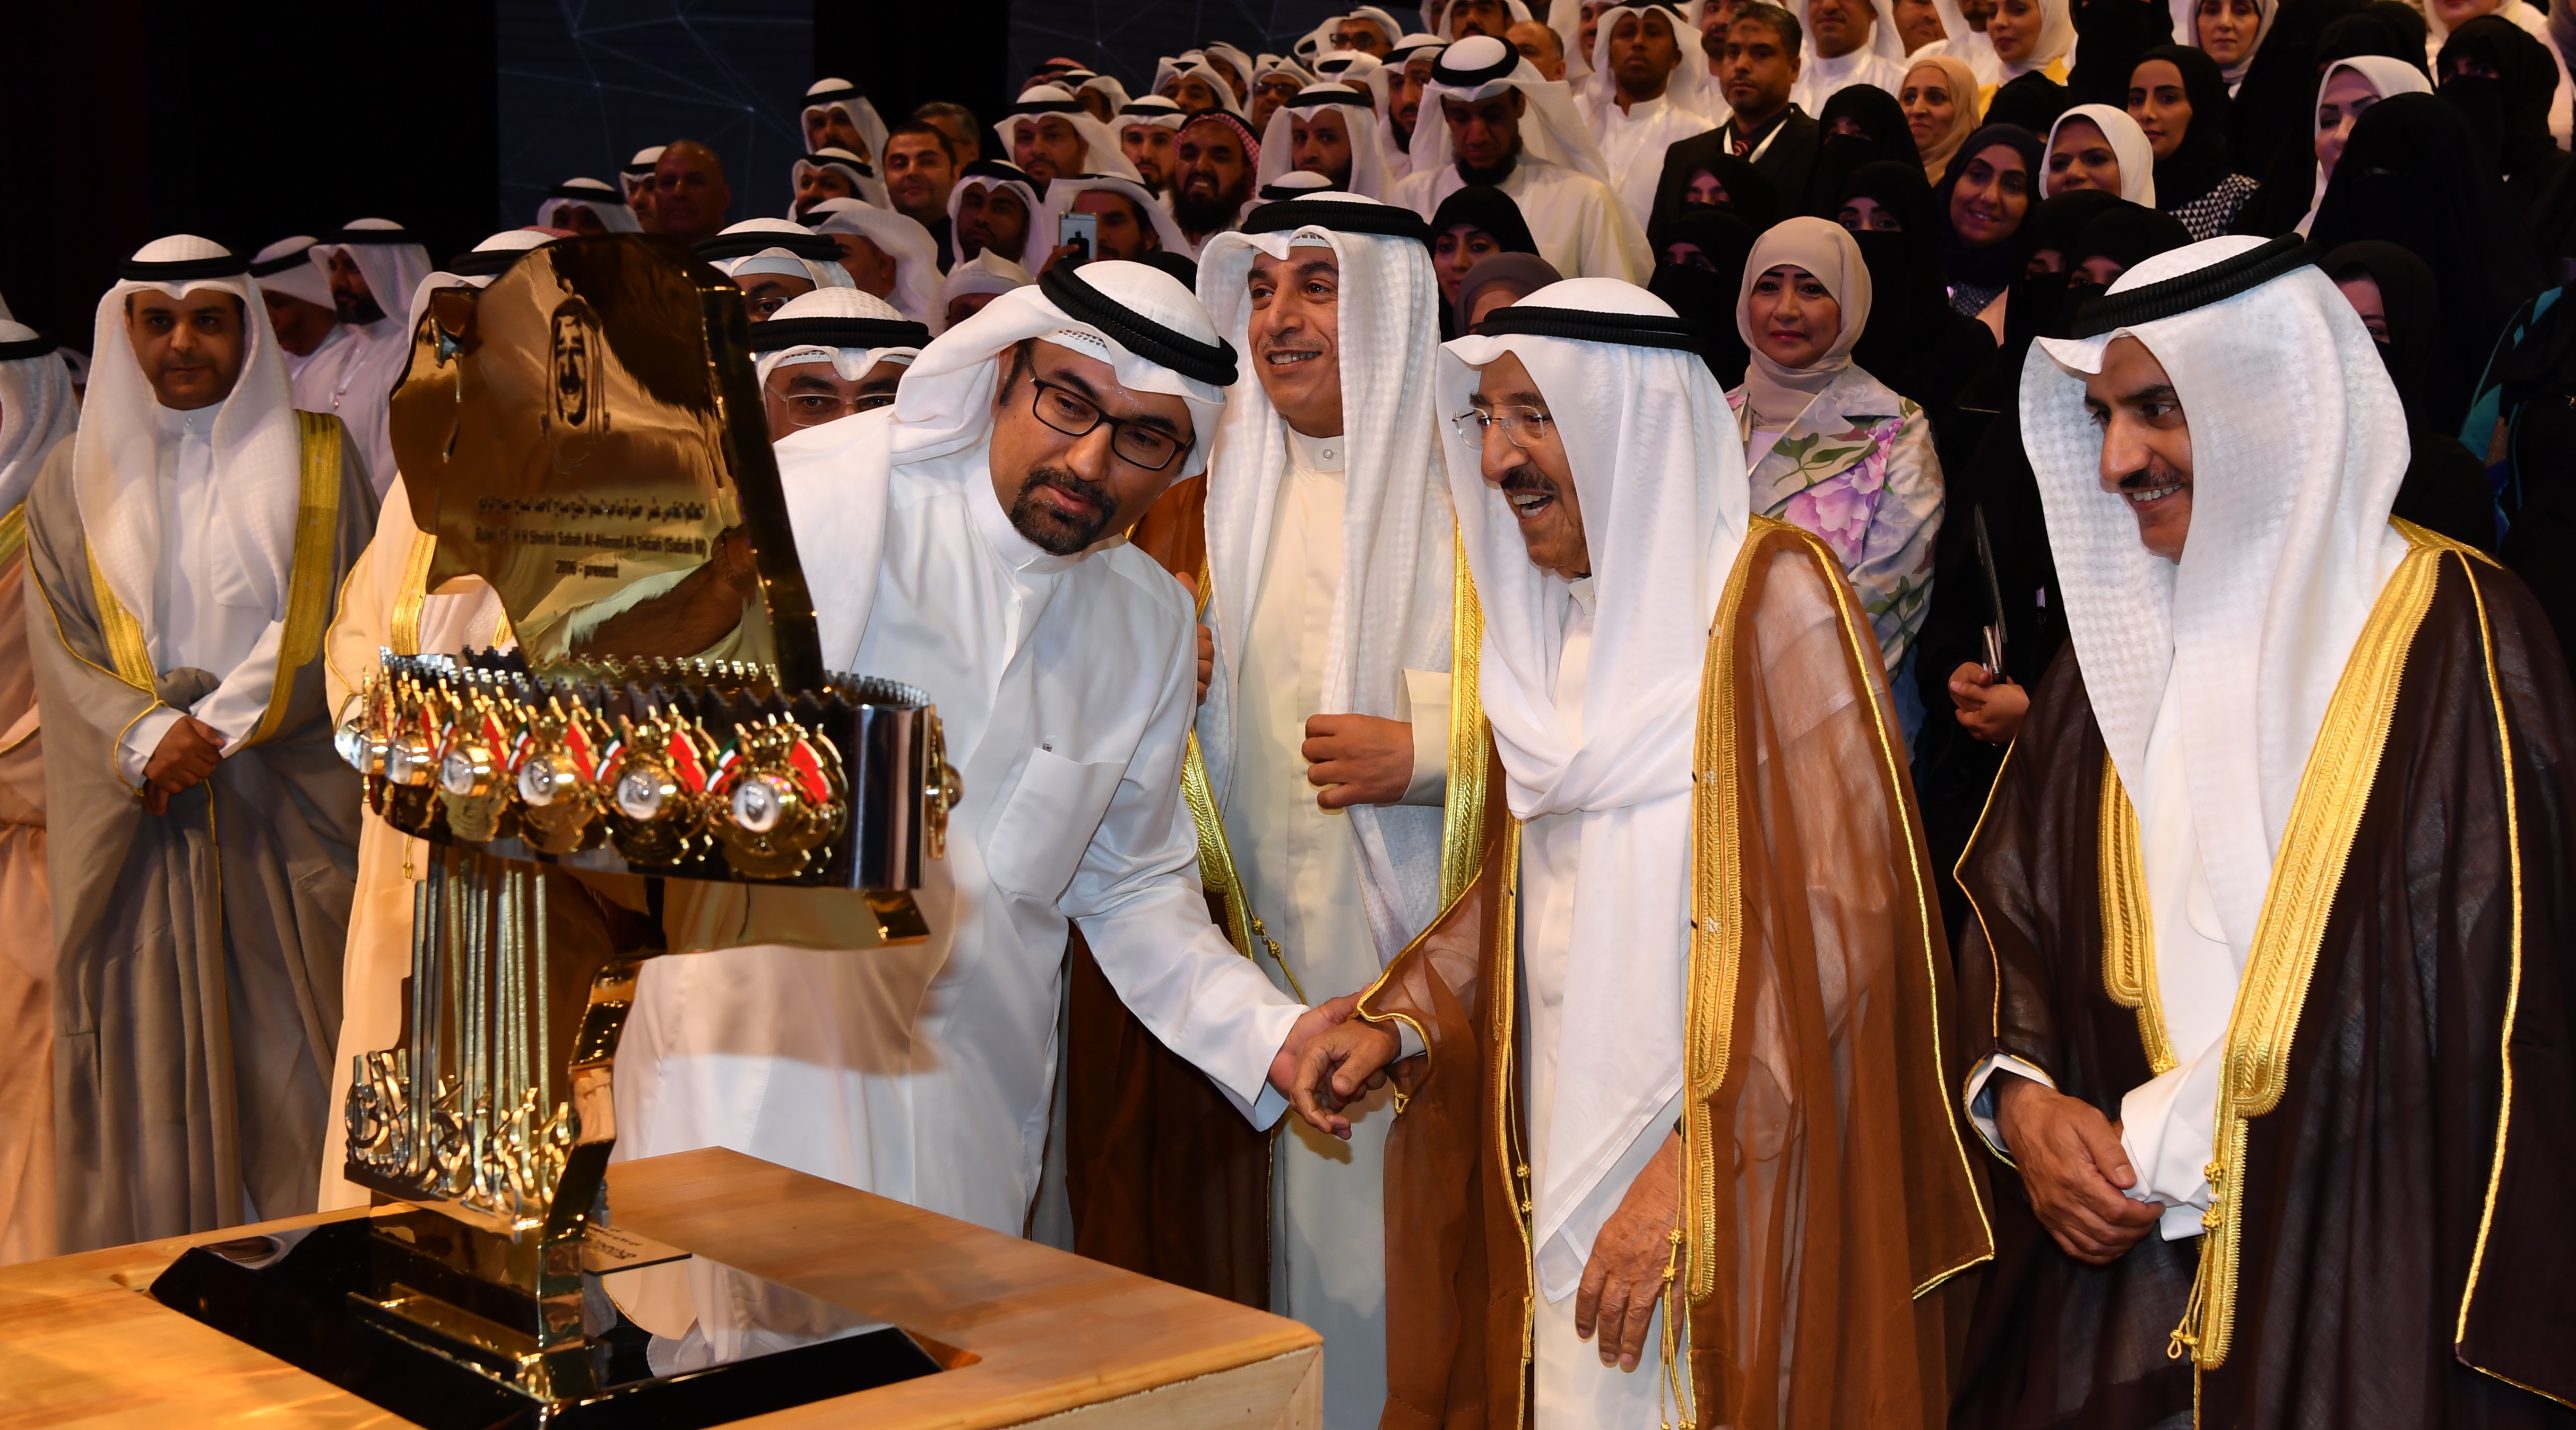 His Highness the Amir Sheikh Sabah Al-Ahmad Al-Jaber Al-Sabah attended and patronized a ceremony to honor distinguished teachers and schools